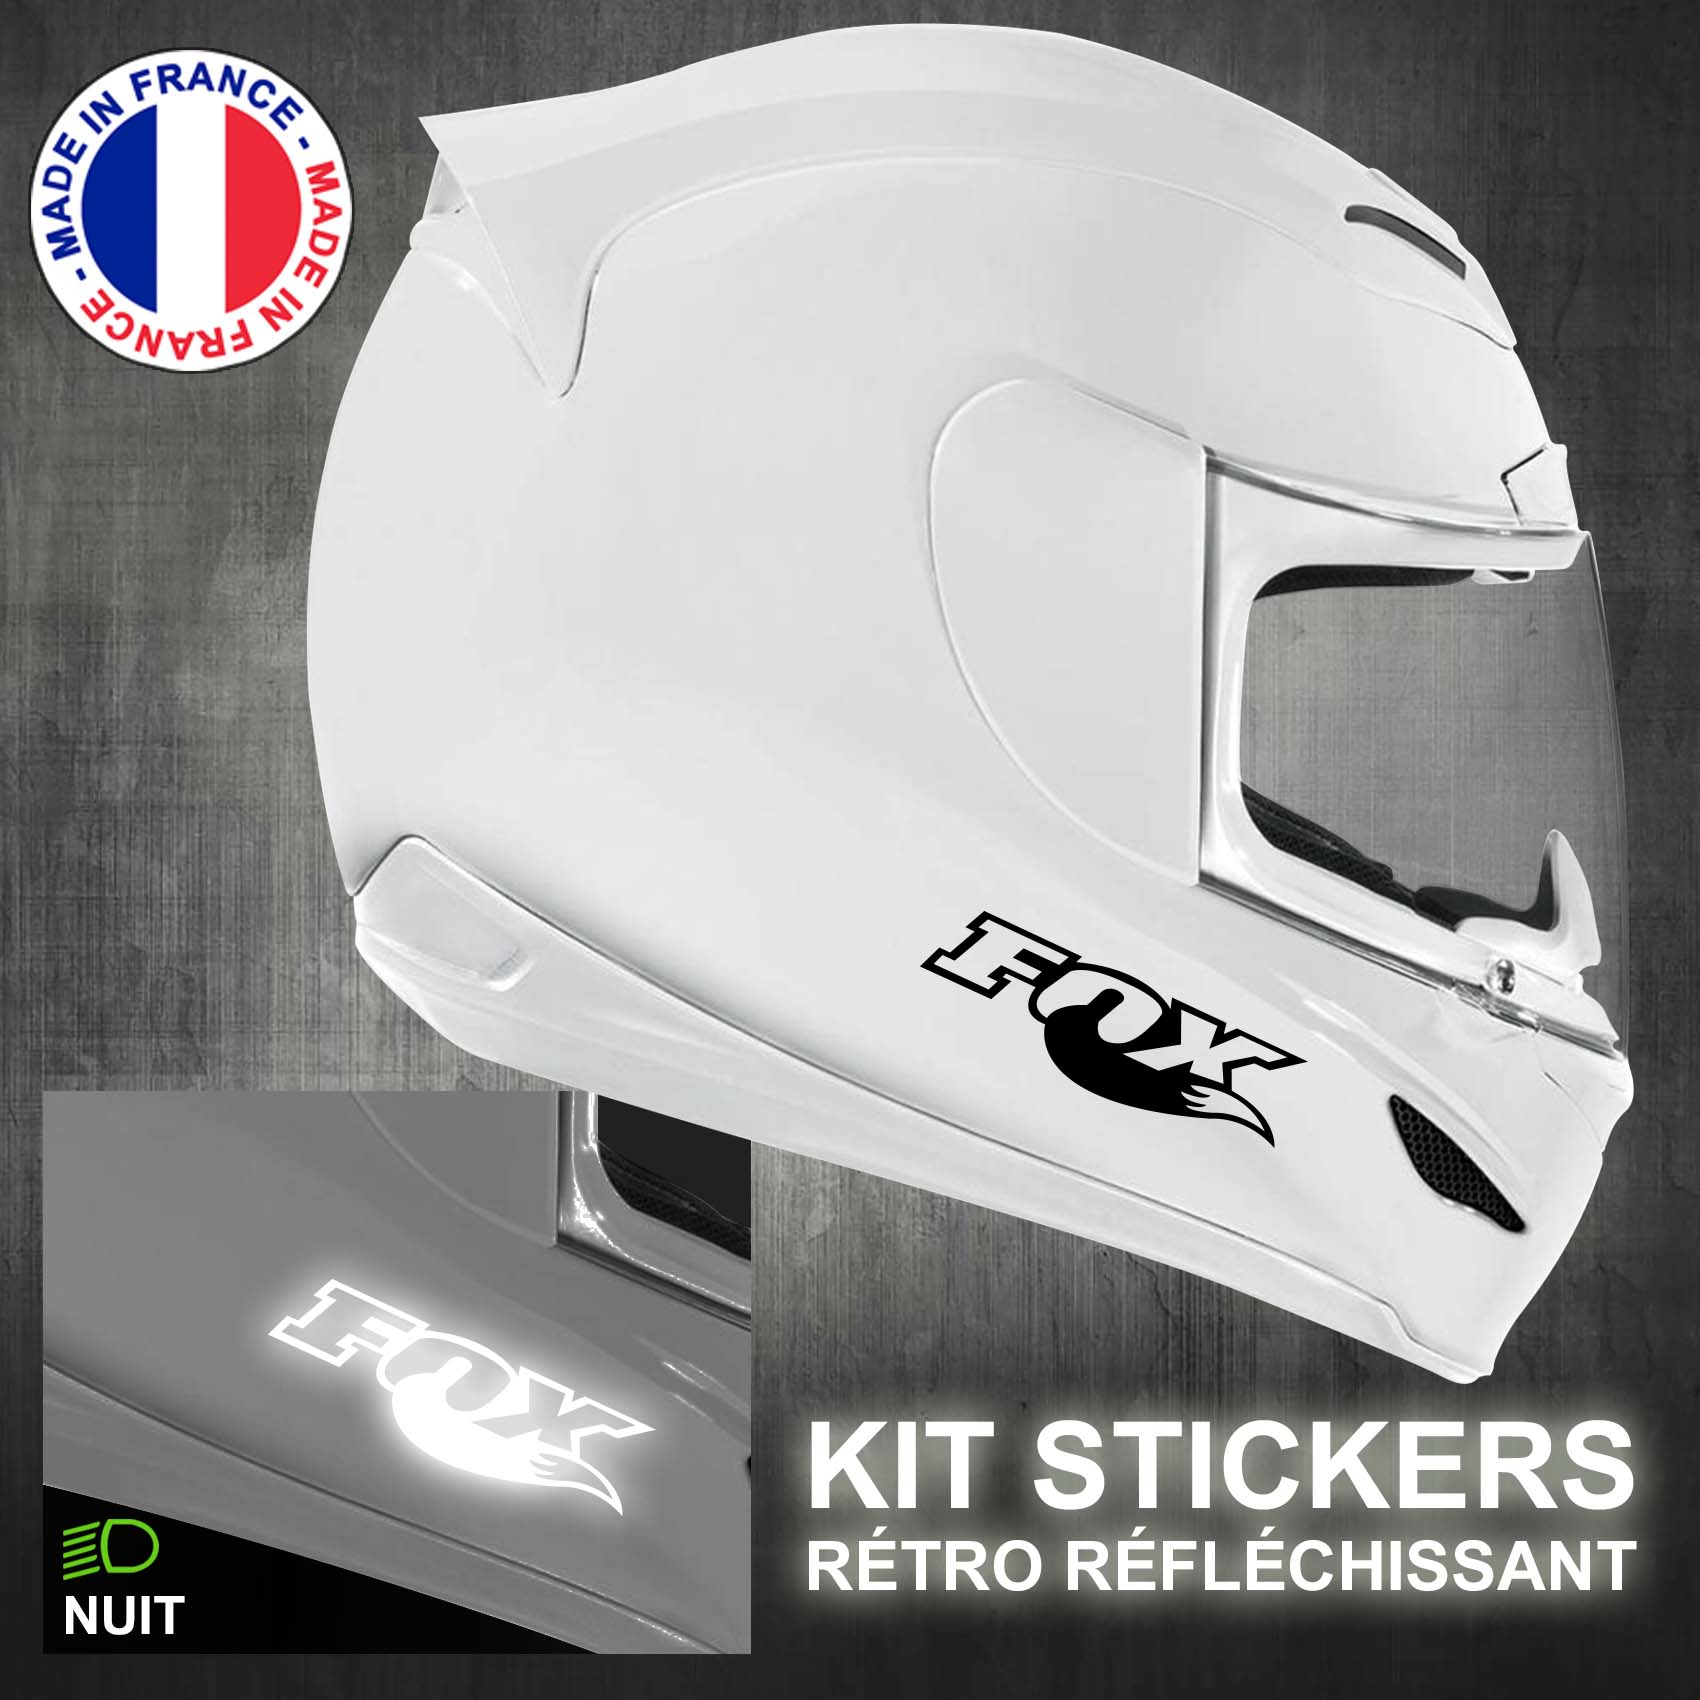 stickers-casque-moto-fox-ref2-retro-reflechissant-autocollant-moto-velo-tuning-racing-route-sticker-casques-adhesif-scooter-nuit-securite-decals-personnalise-personnalisable-min